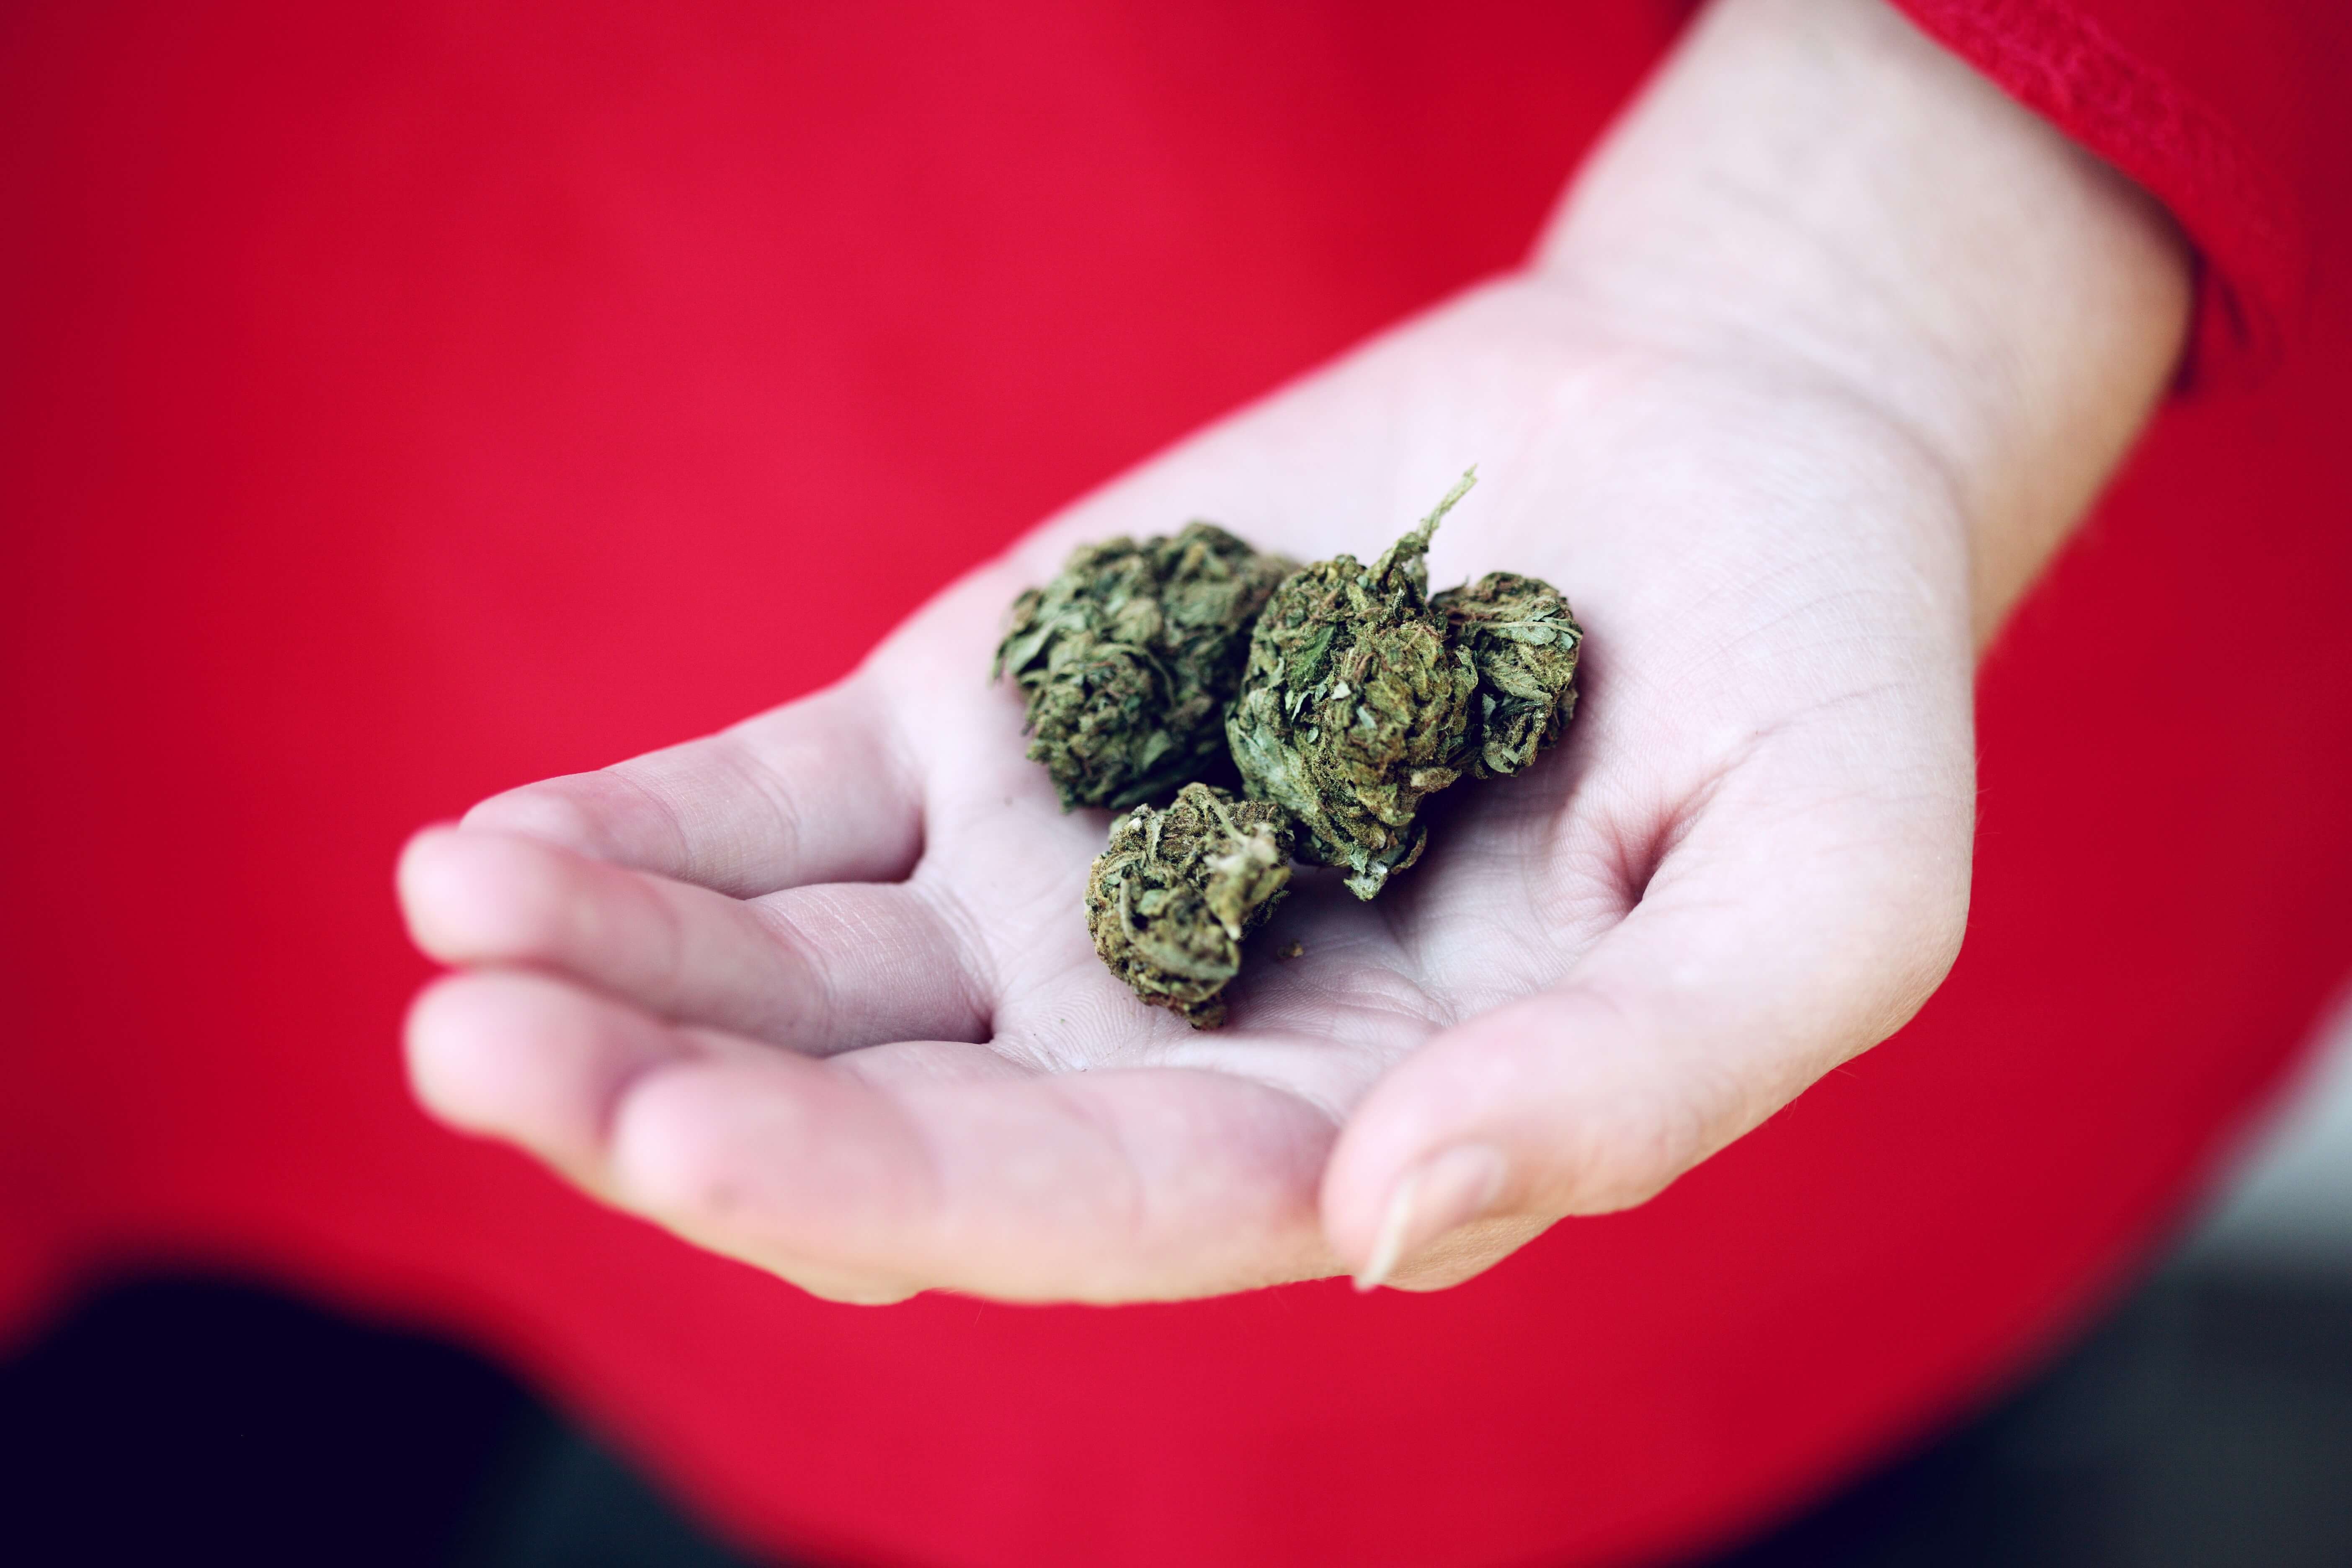 Woman wearing red sweater with cannabis buds in her palm